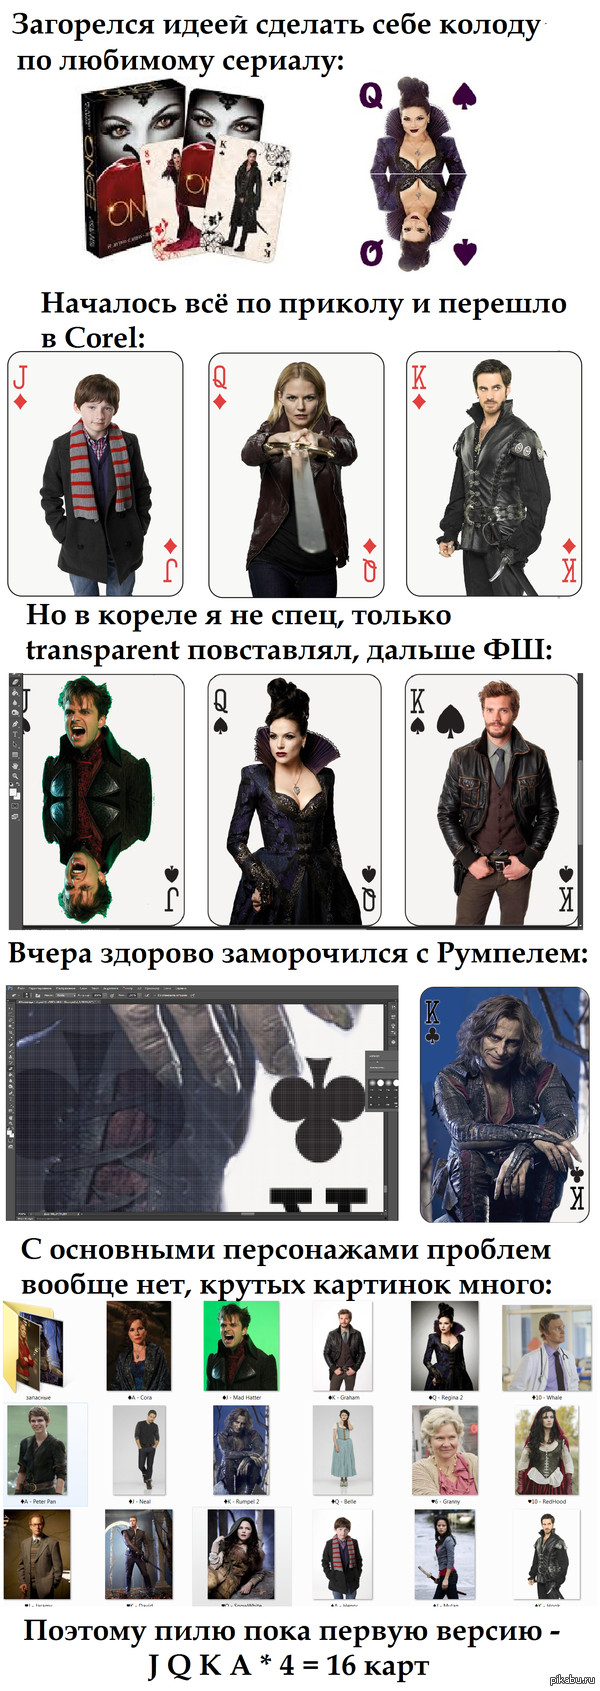  54    Once Upon a time &amp;#9829;&amp;#9830;&amp;#9827;&amp;#9824;      ,        : vk.com/upon_a ,  , ,   :)